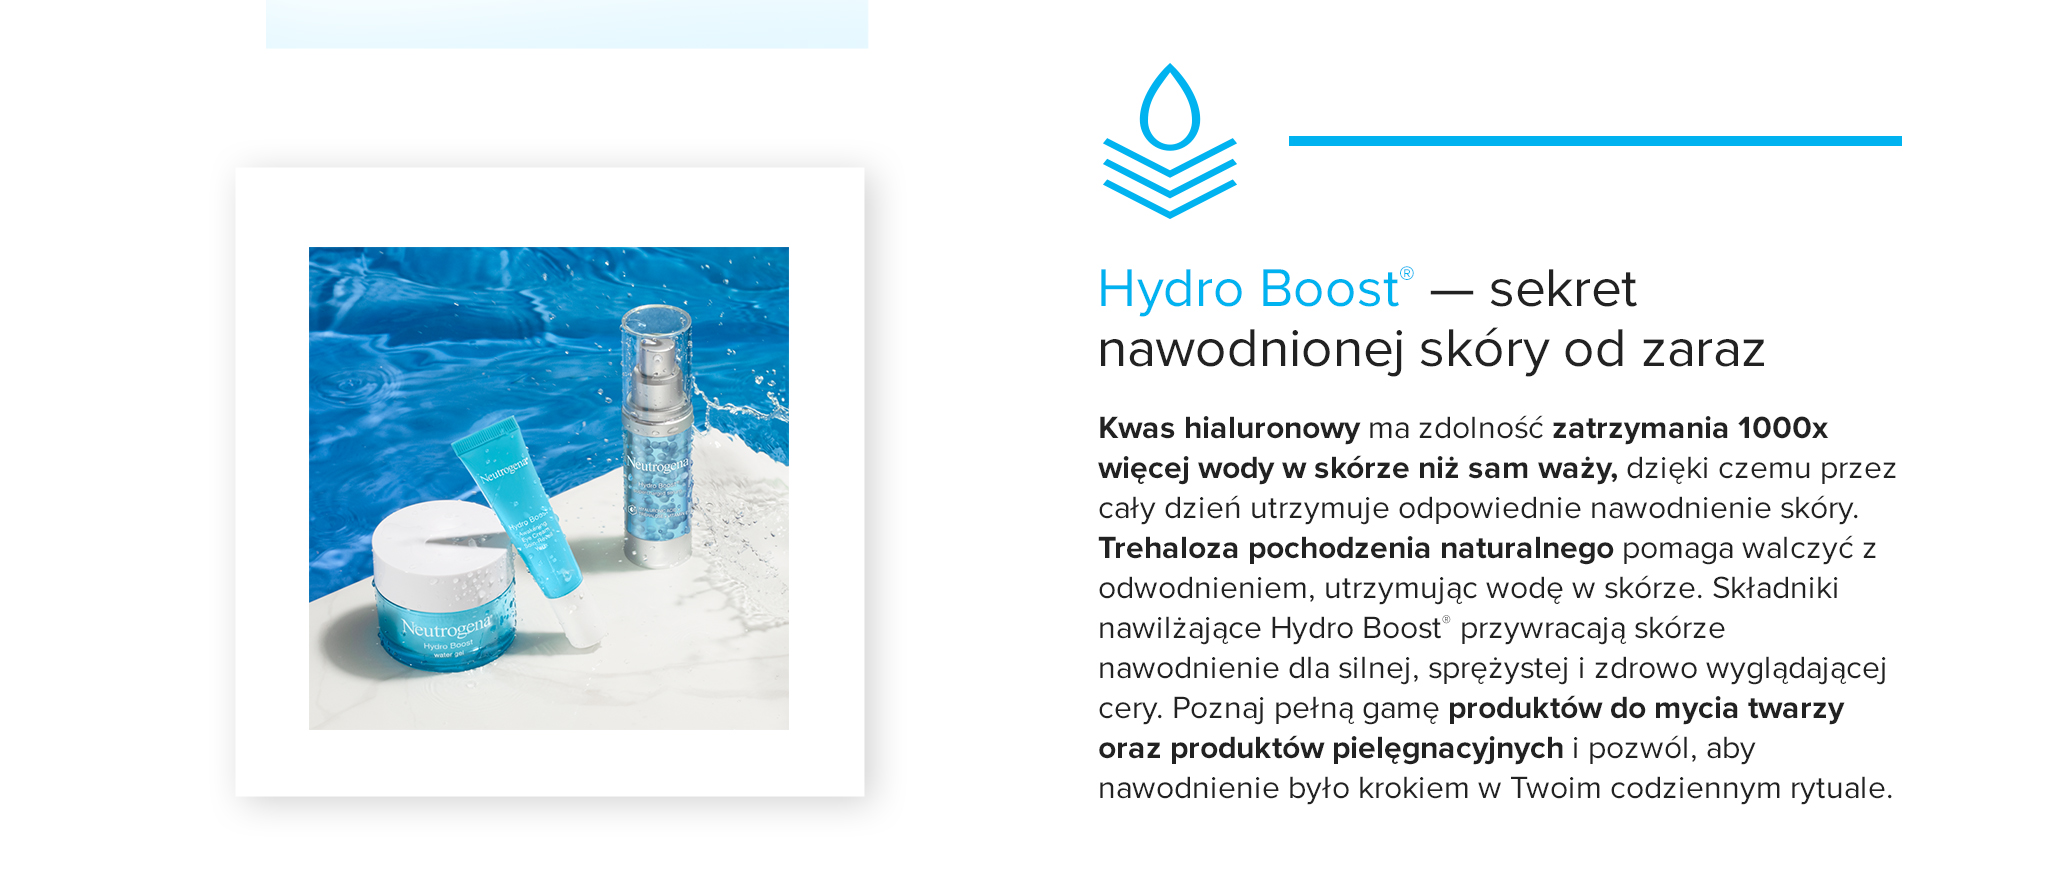 Neutrogena Hydro Boost Hyaluronic Acid Concentrated Serum